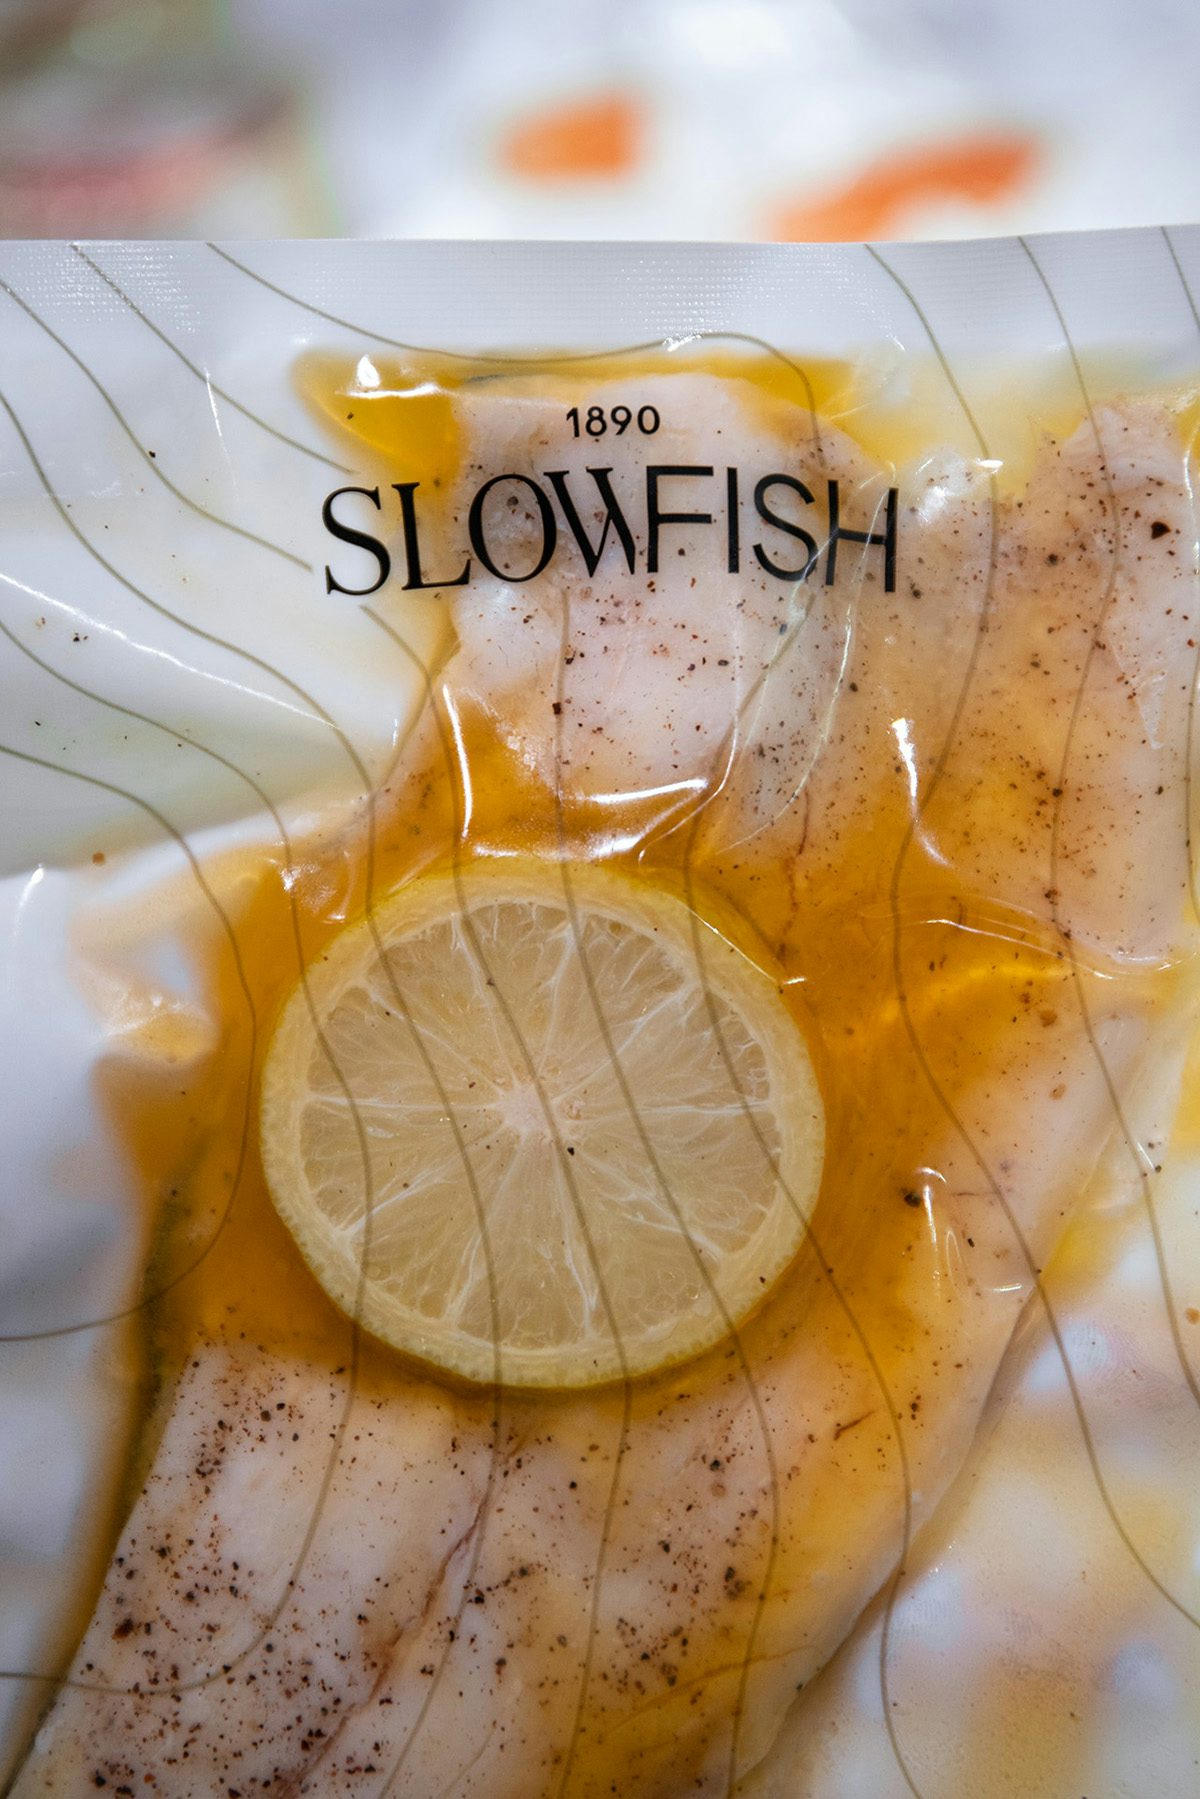 Photograph of packaged fish with featuring the Slowfish branding by Vasava